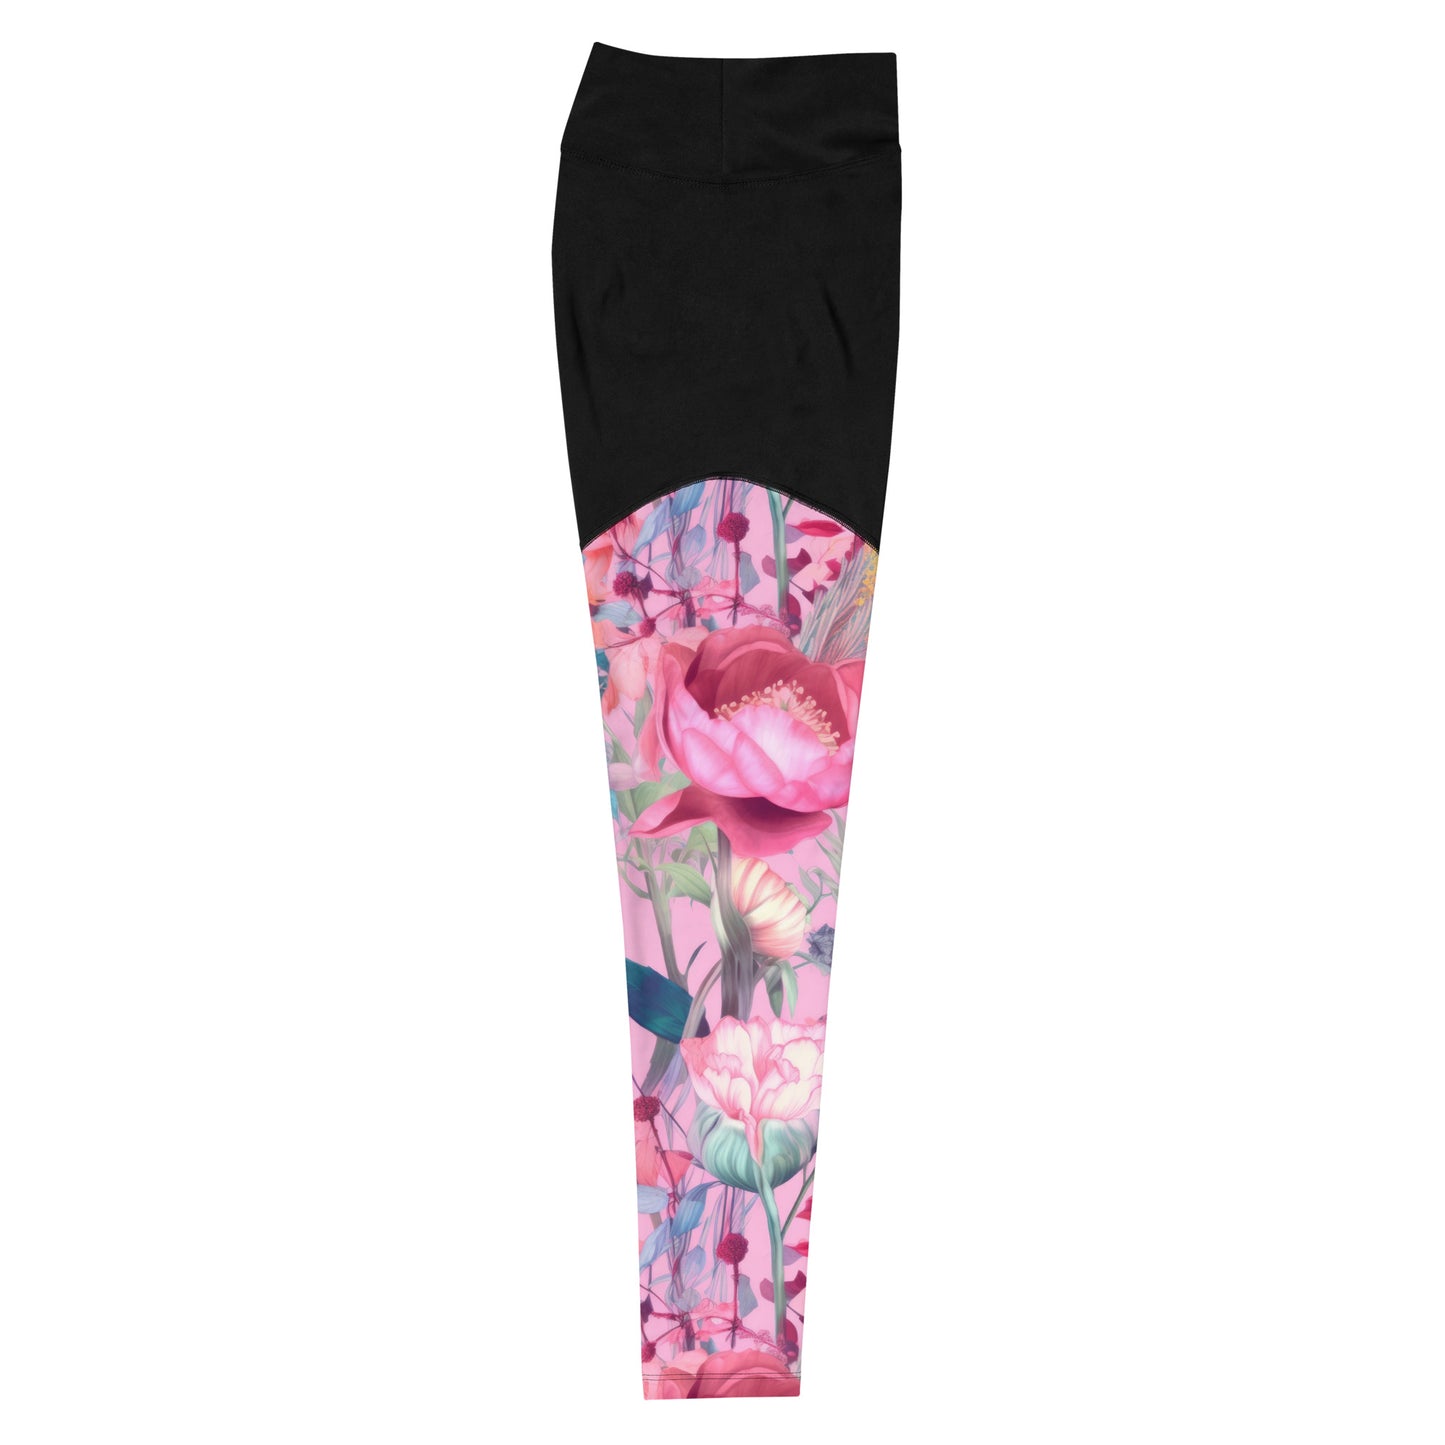 Sports Leggings: Spring Queen Pink Collection in Sally